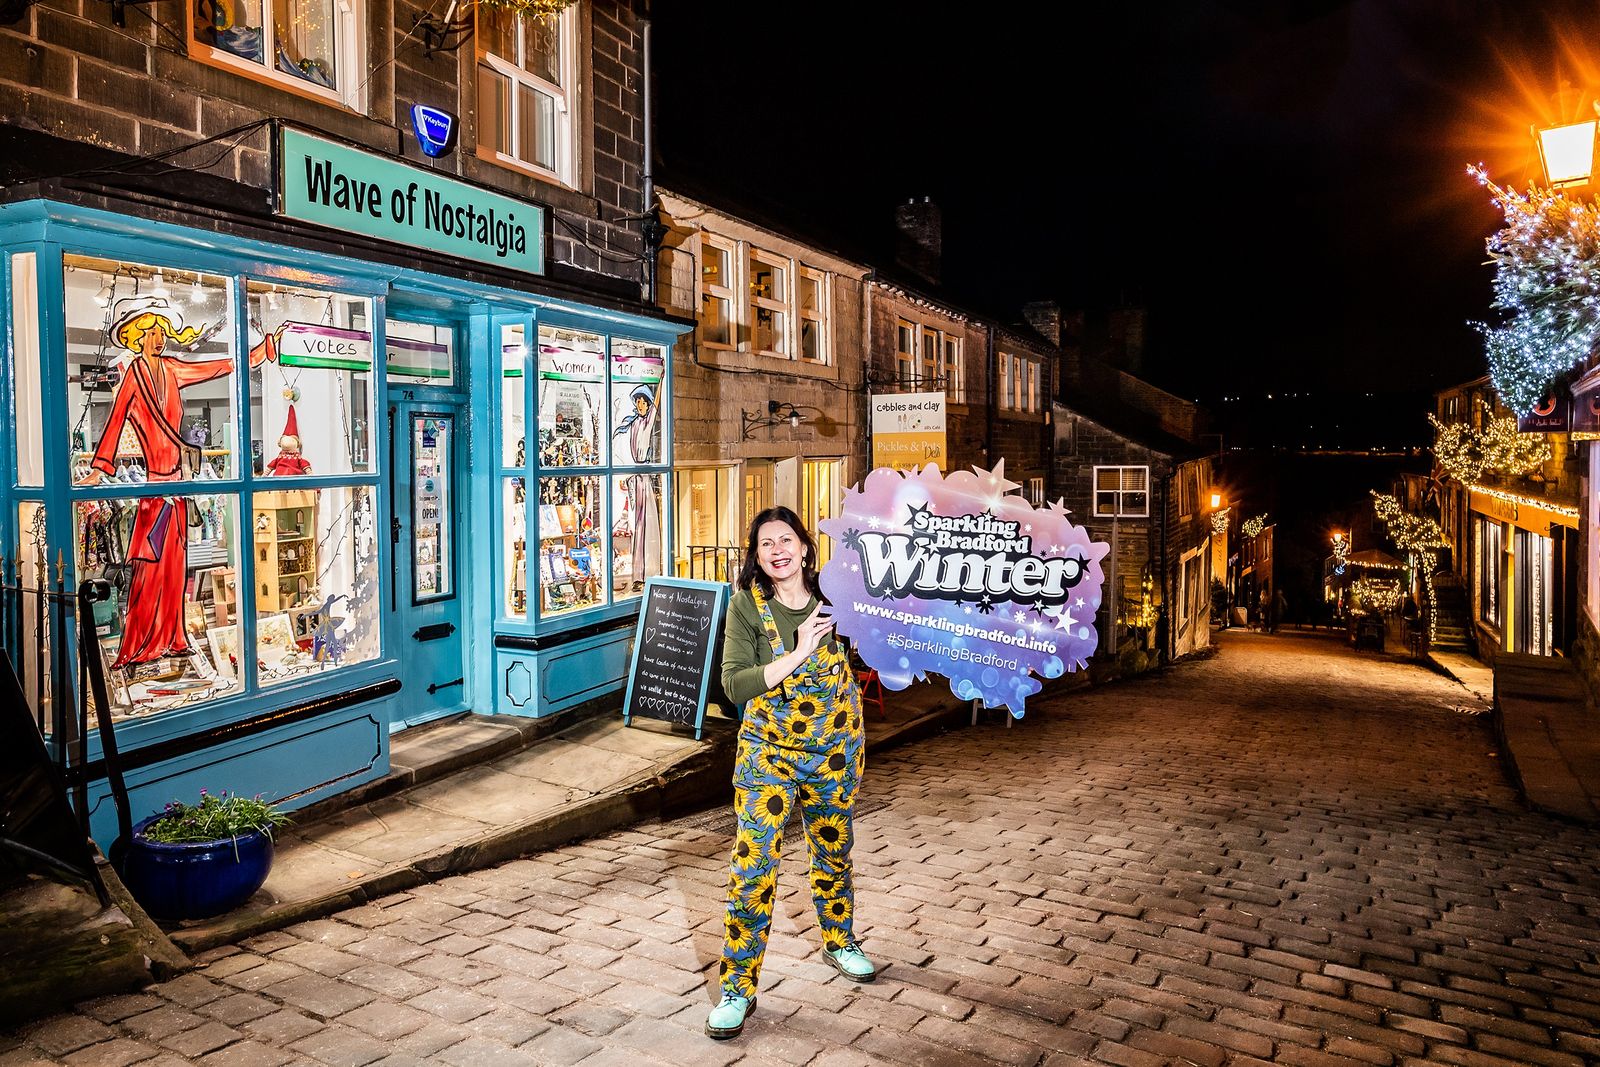 Haworth’s late night shopping event hailed a success